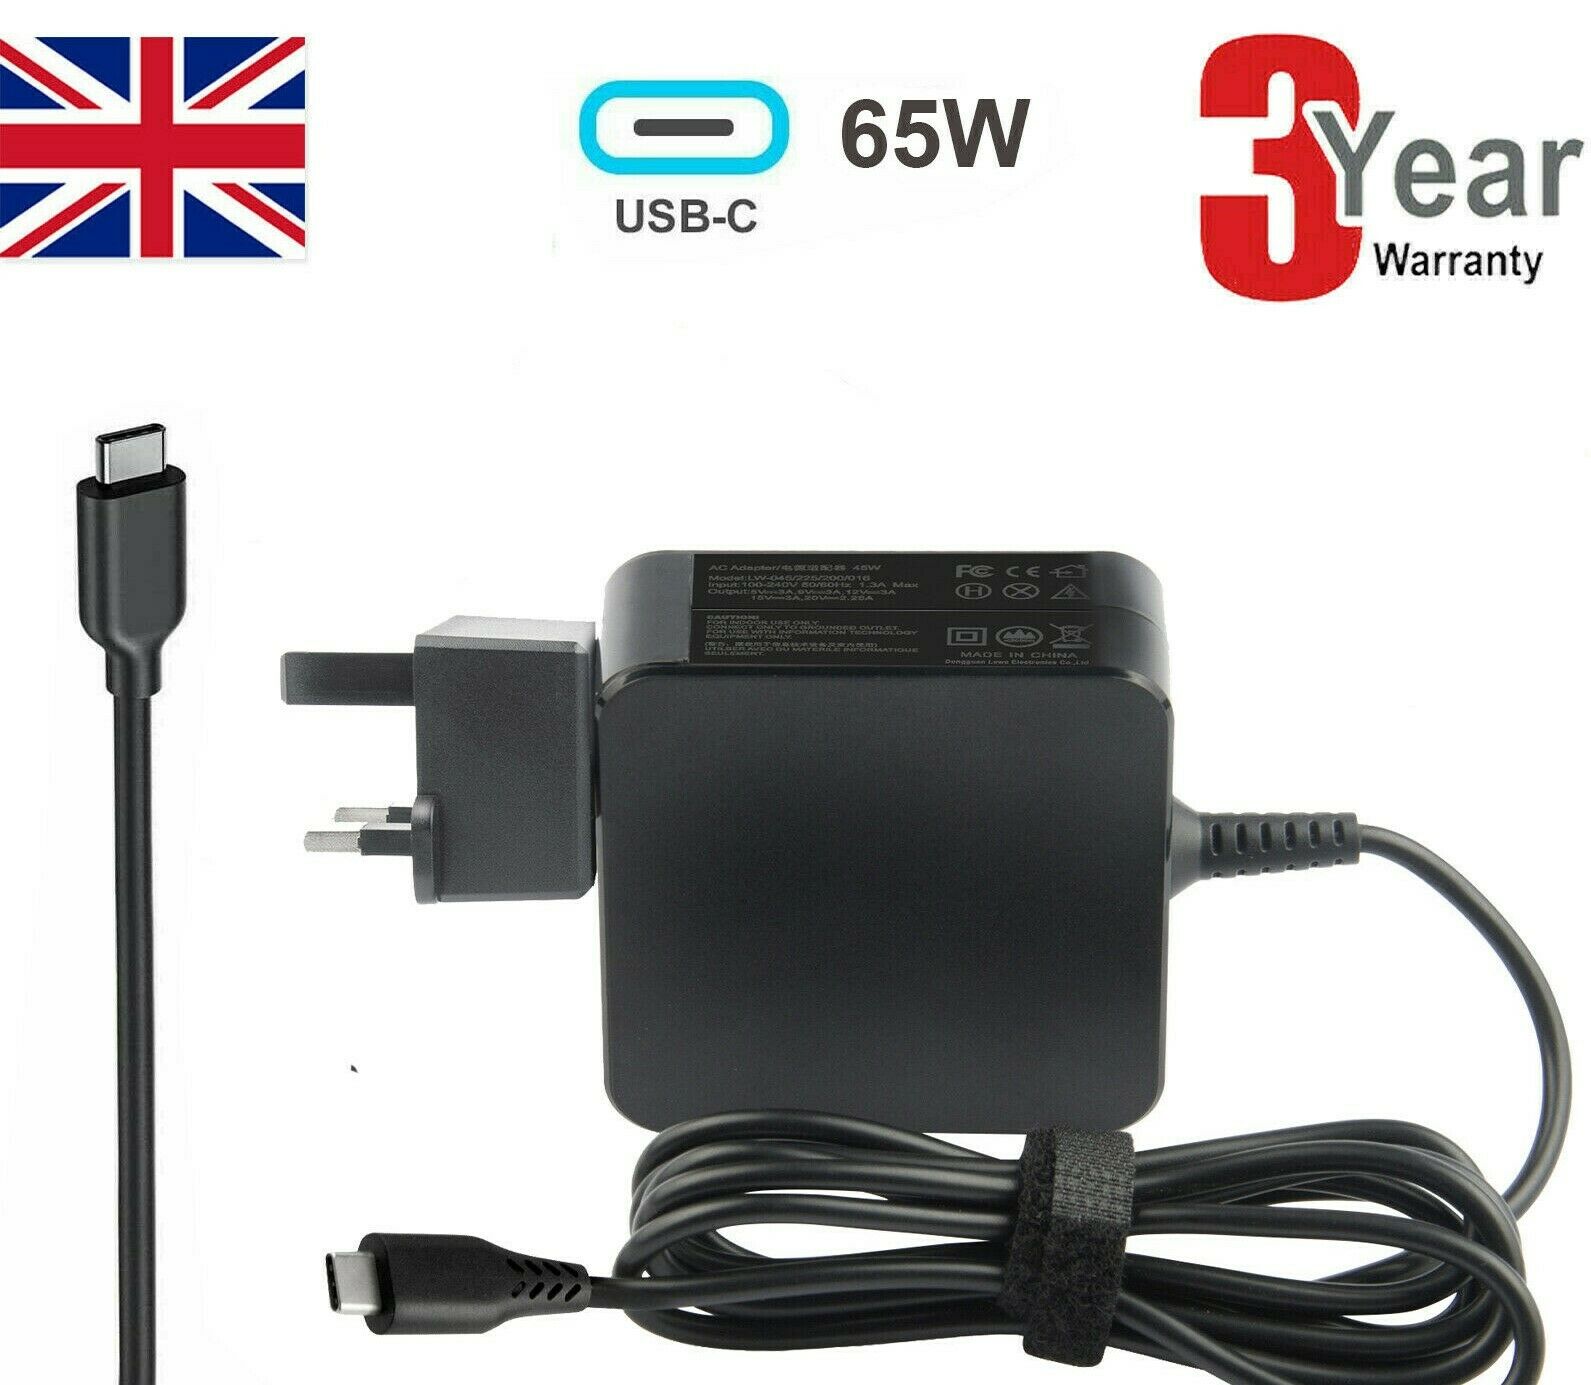 65W USB Type-C Adapter Charger for DELL,HP,ASUS,Lenovo,Xiaomi,Huawei,Acer Laptop Colour: Black EAN: Does not apply Com